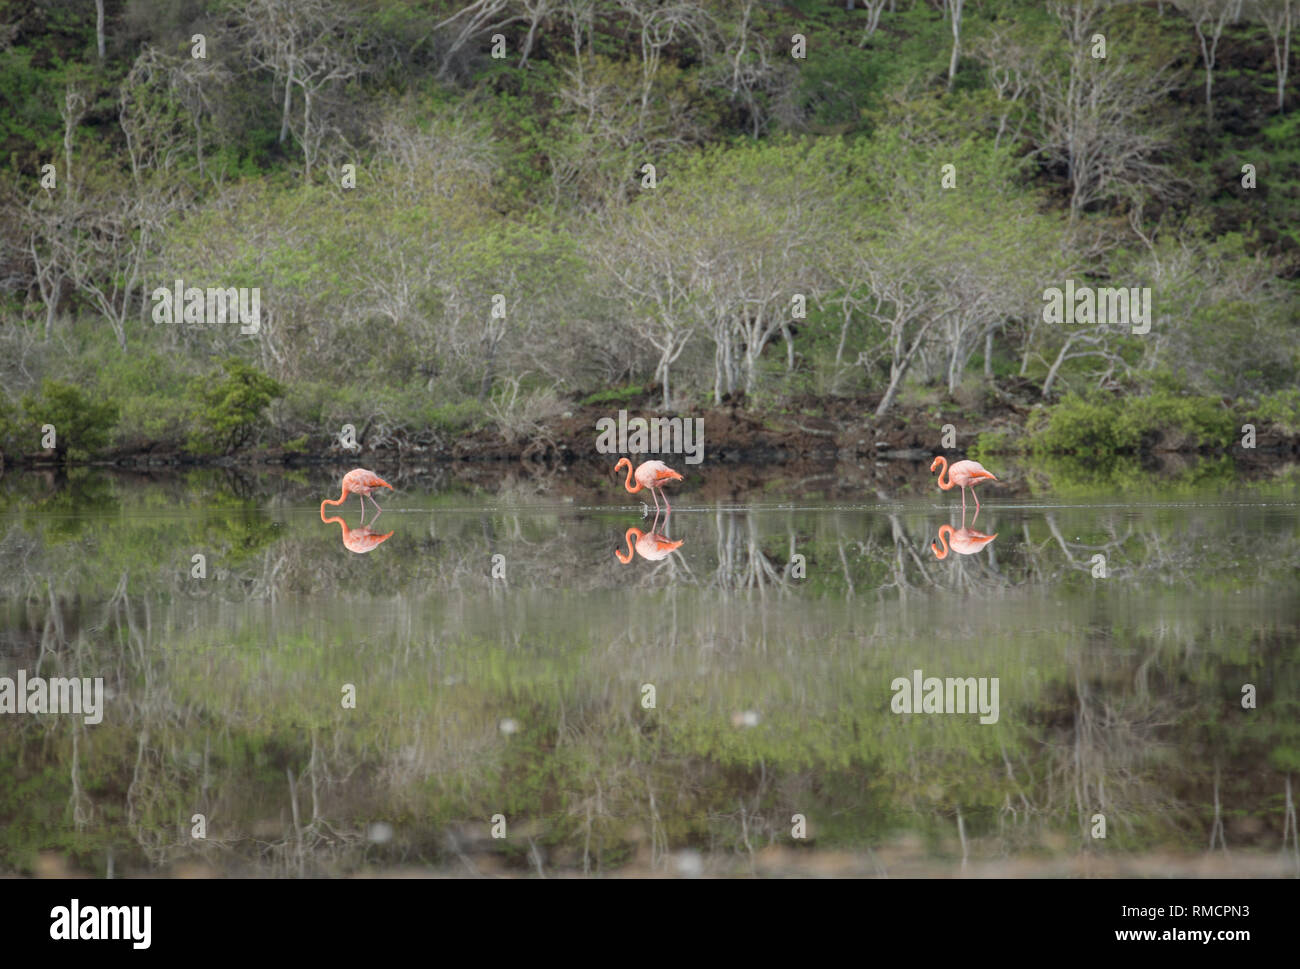 Three Flamingos with reflections in the Galapagos Stock Photo